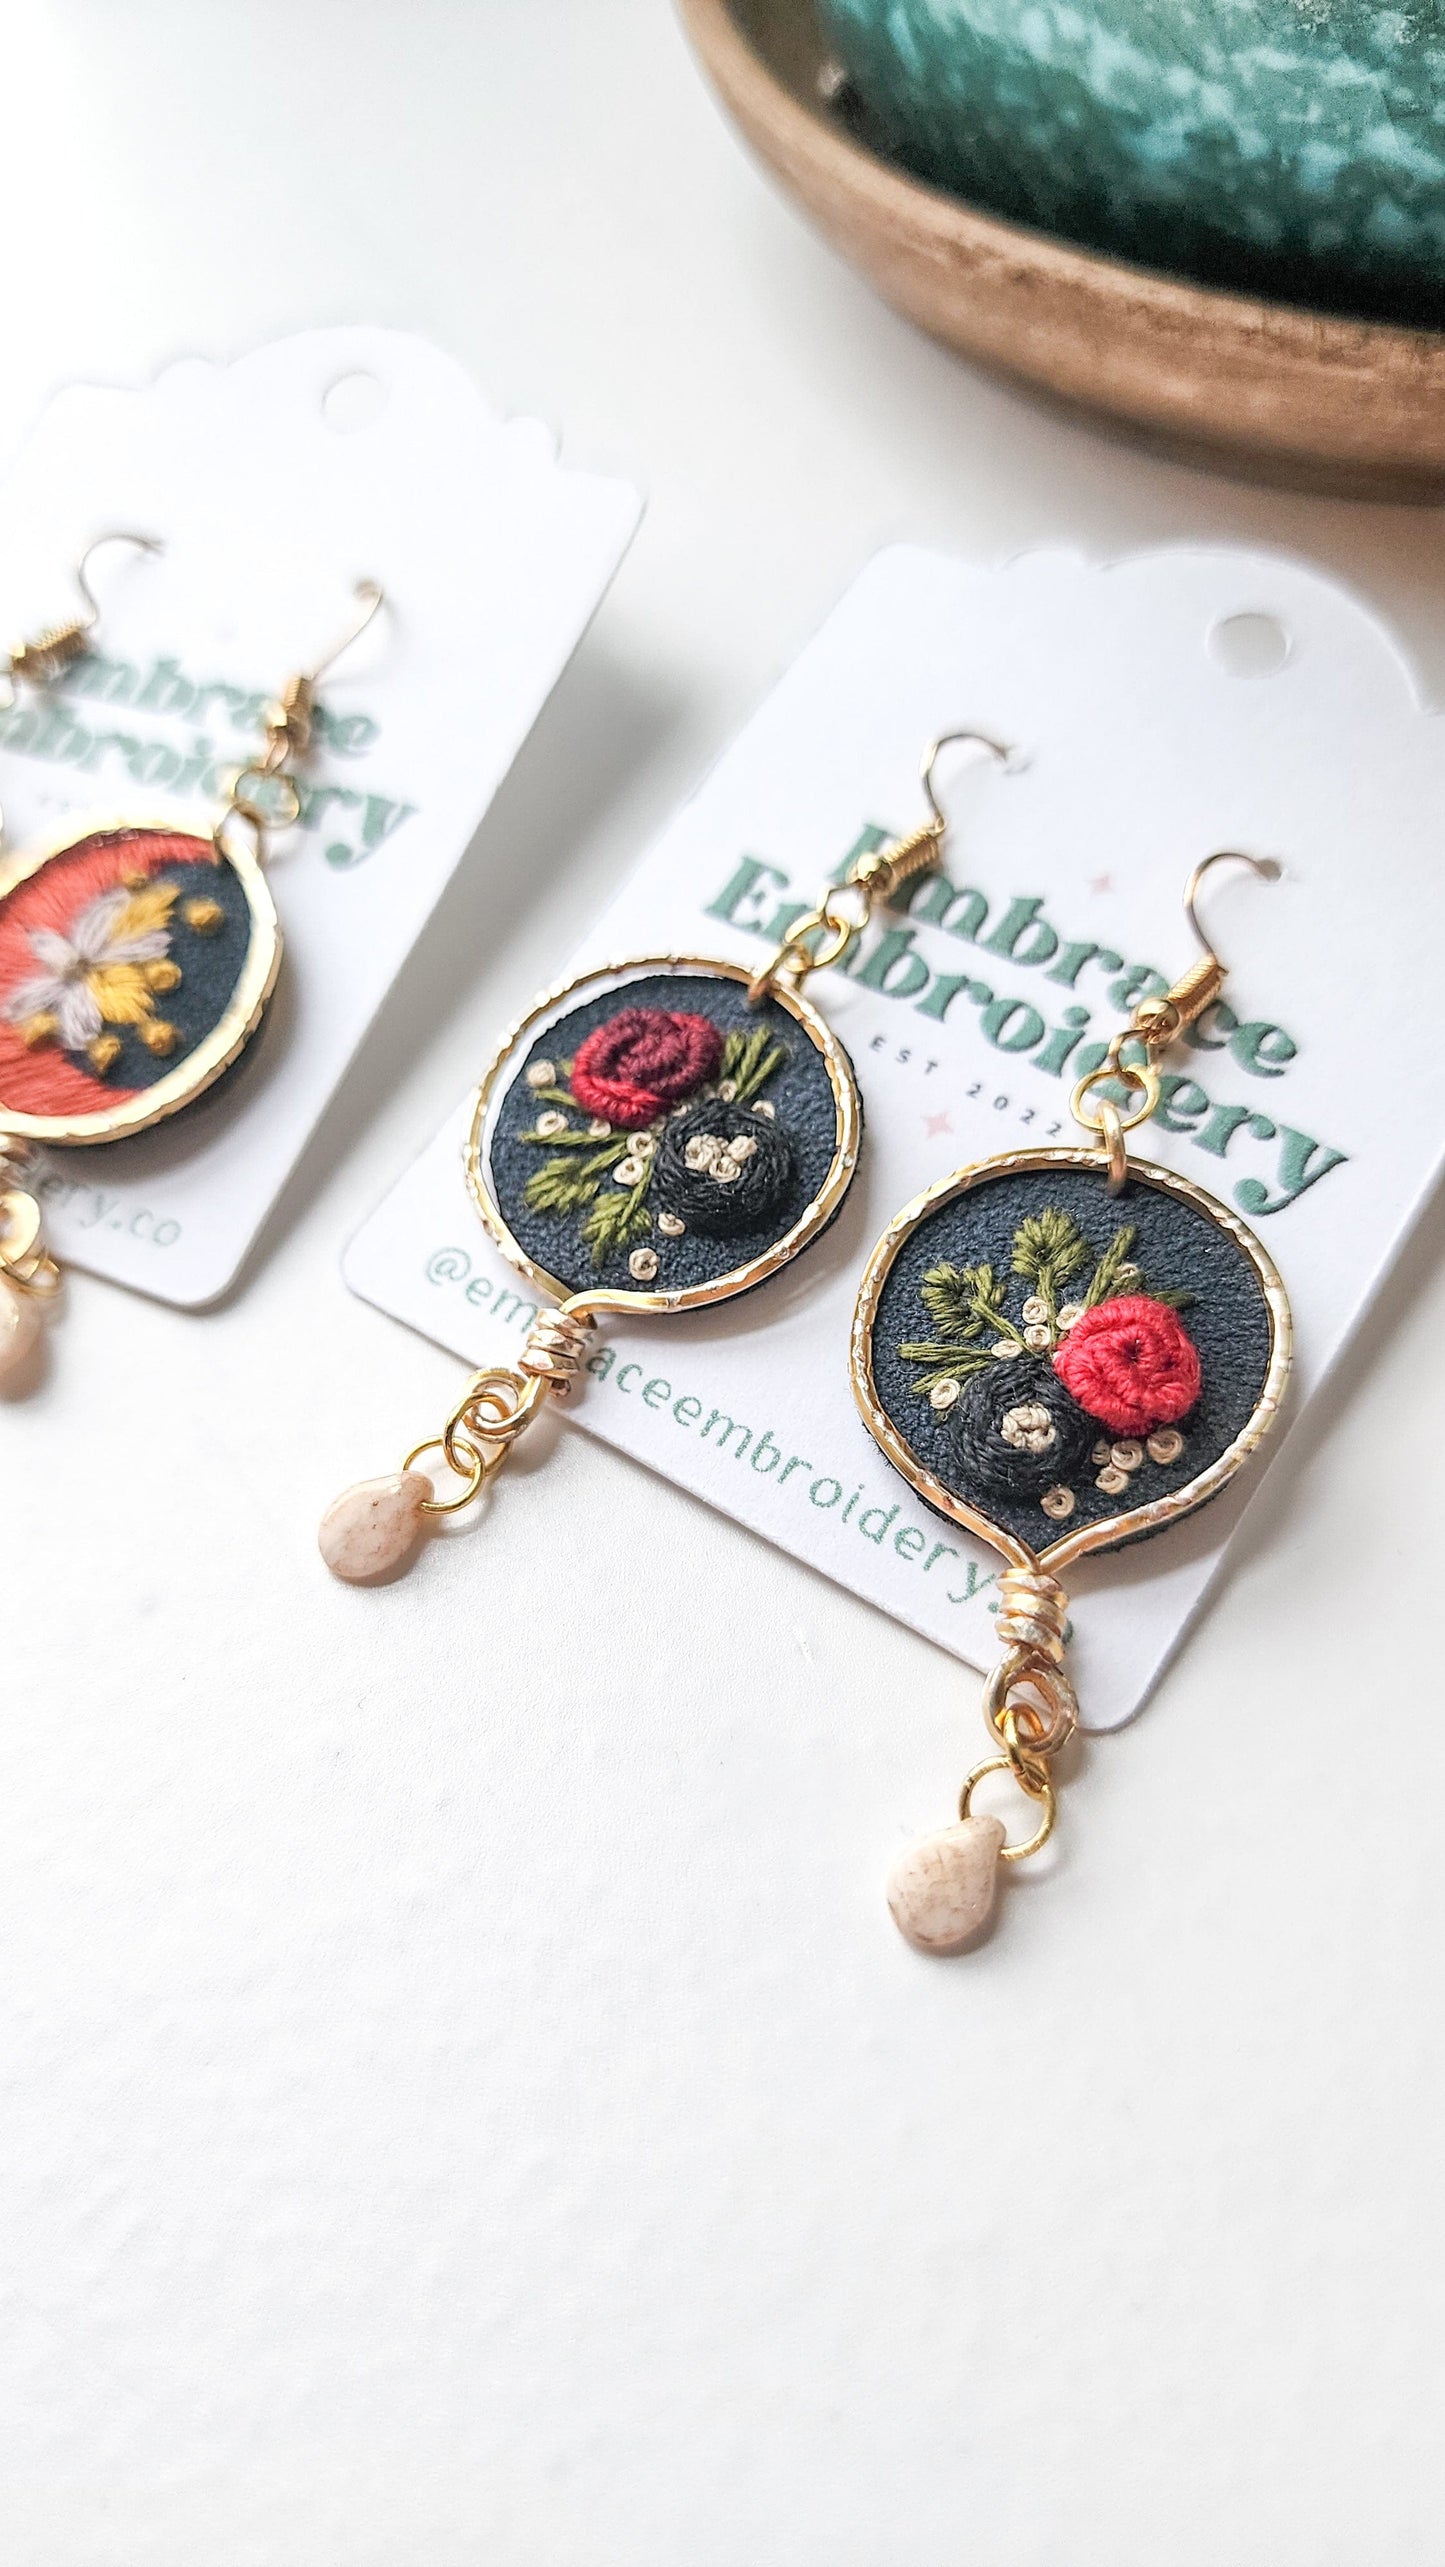 Embrace Embroidery Midnight Rose - Hand Embroidered Earrings- MADE TO ORDER